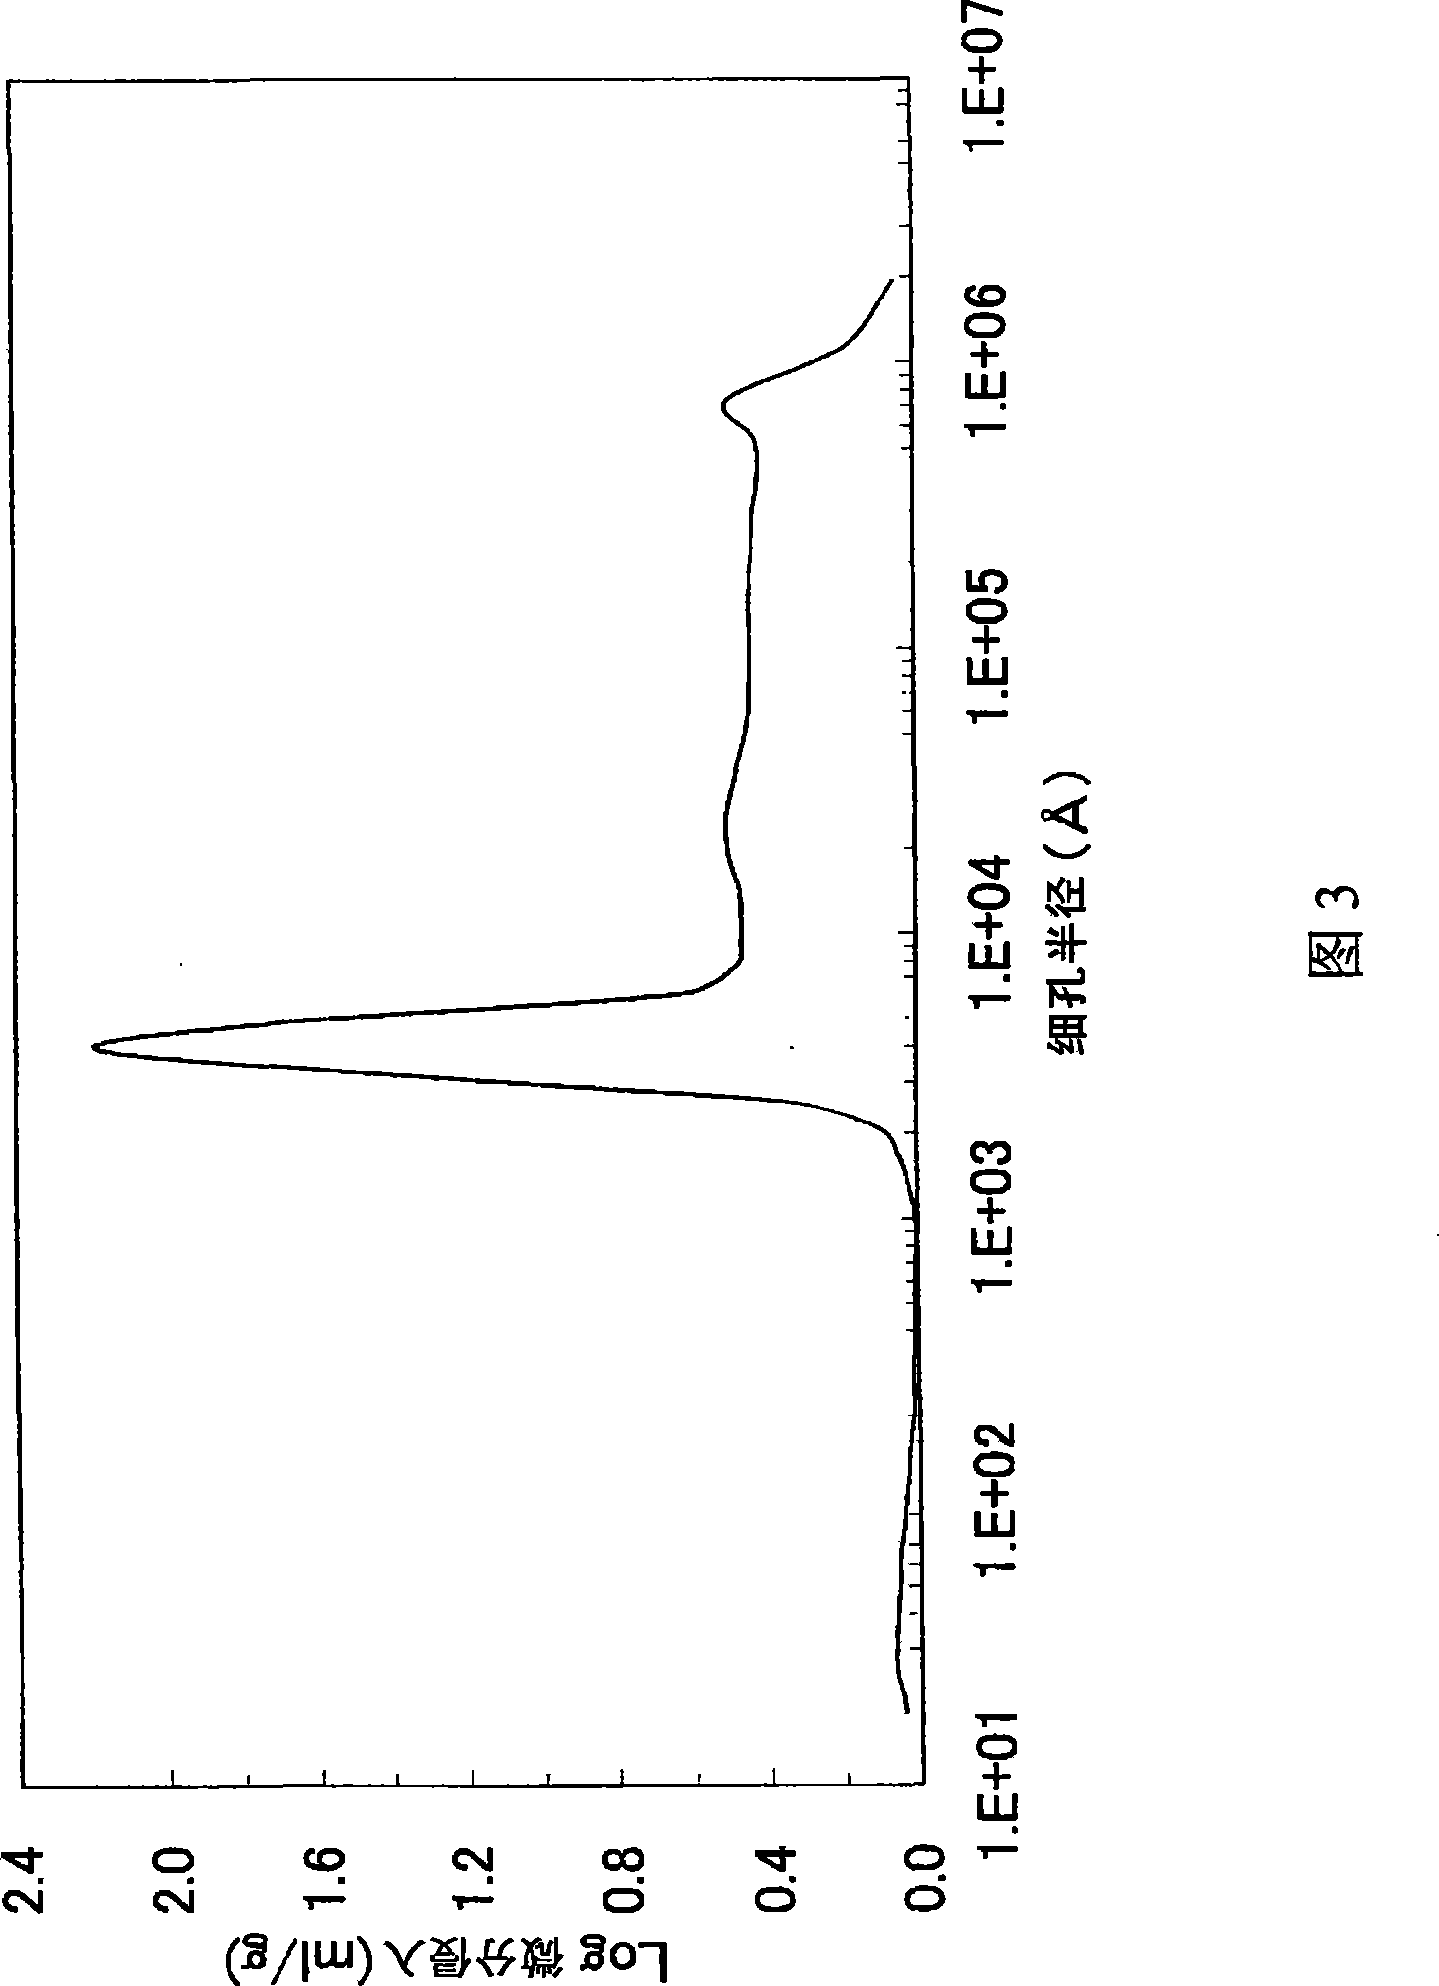 Lithium transition metal-based compound powder for positive electrode material in lithium rechargeable battery, method for manufacturing the powder, spray dried product of the powder, firing precursor